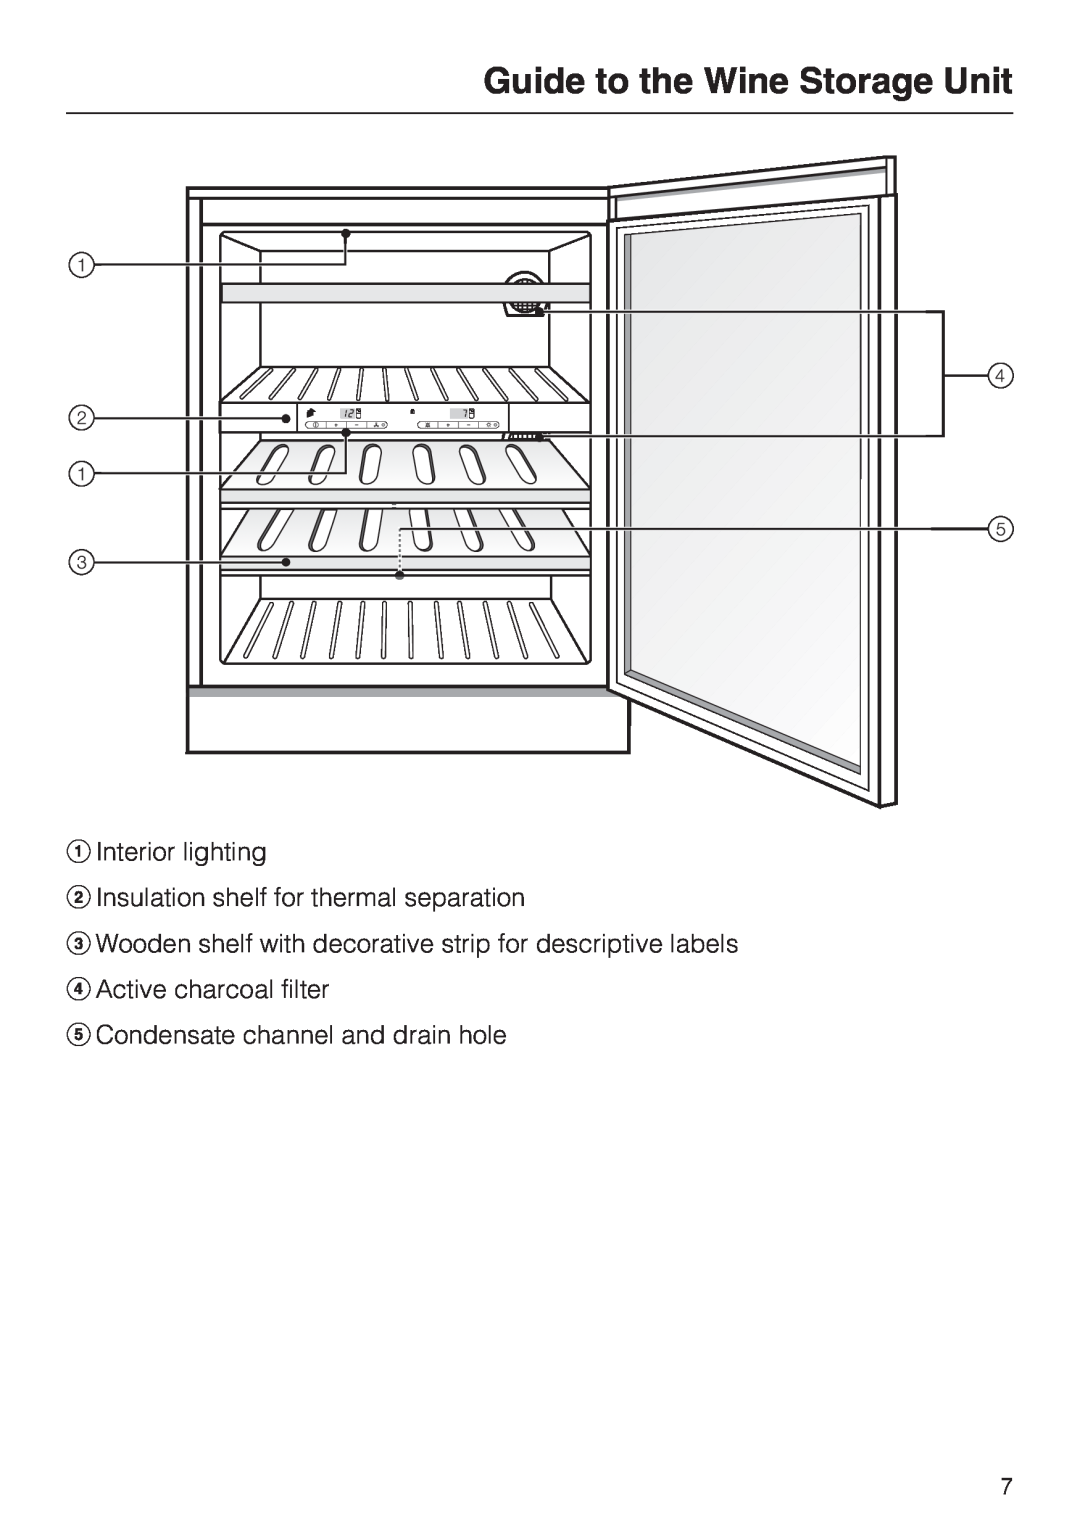 Miele KWT 4154 UG-1 Guide to the Wine Storage Unit, Interior lighting, Insulation shelf for thermal separation 